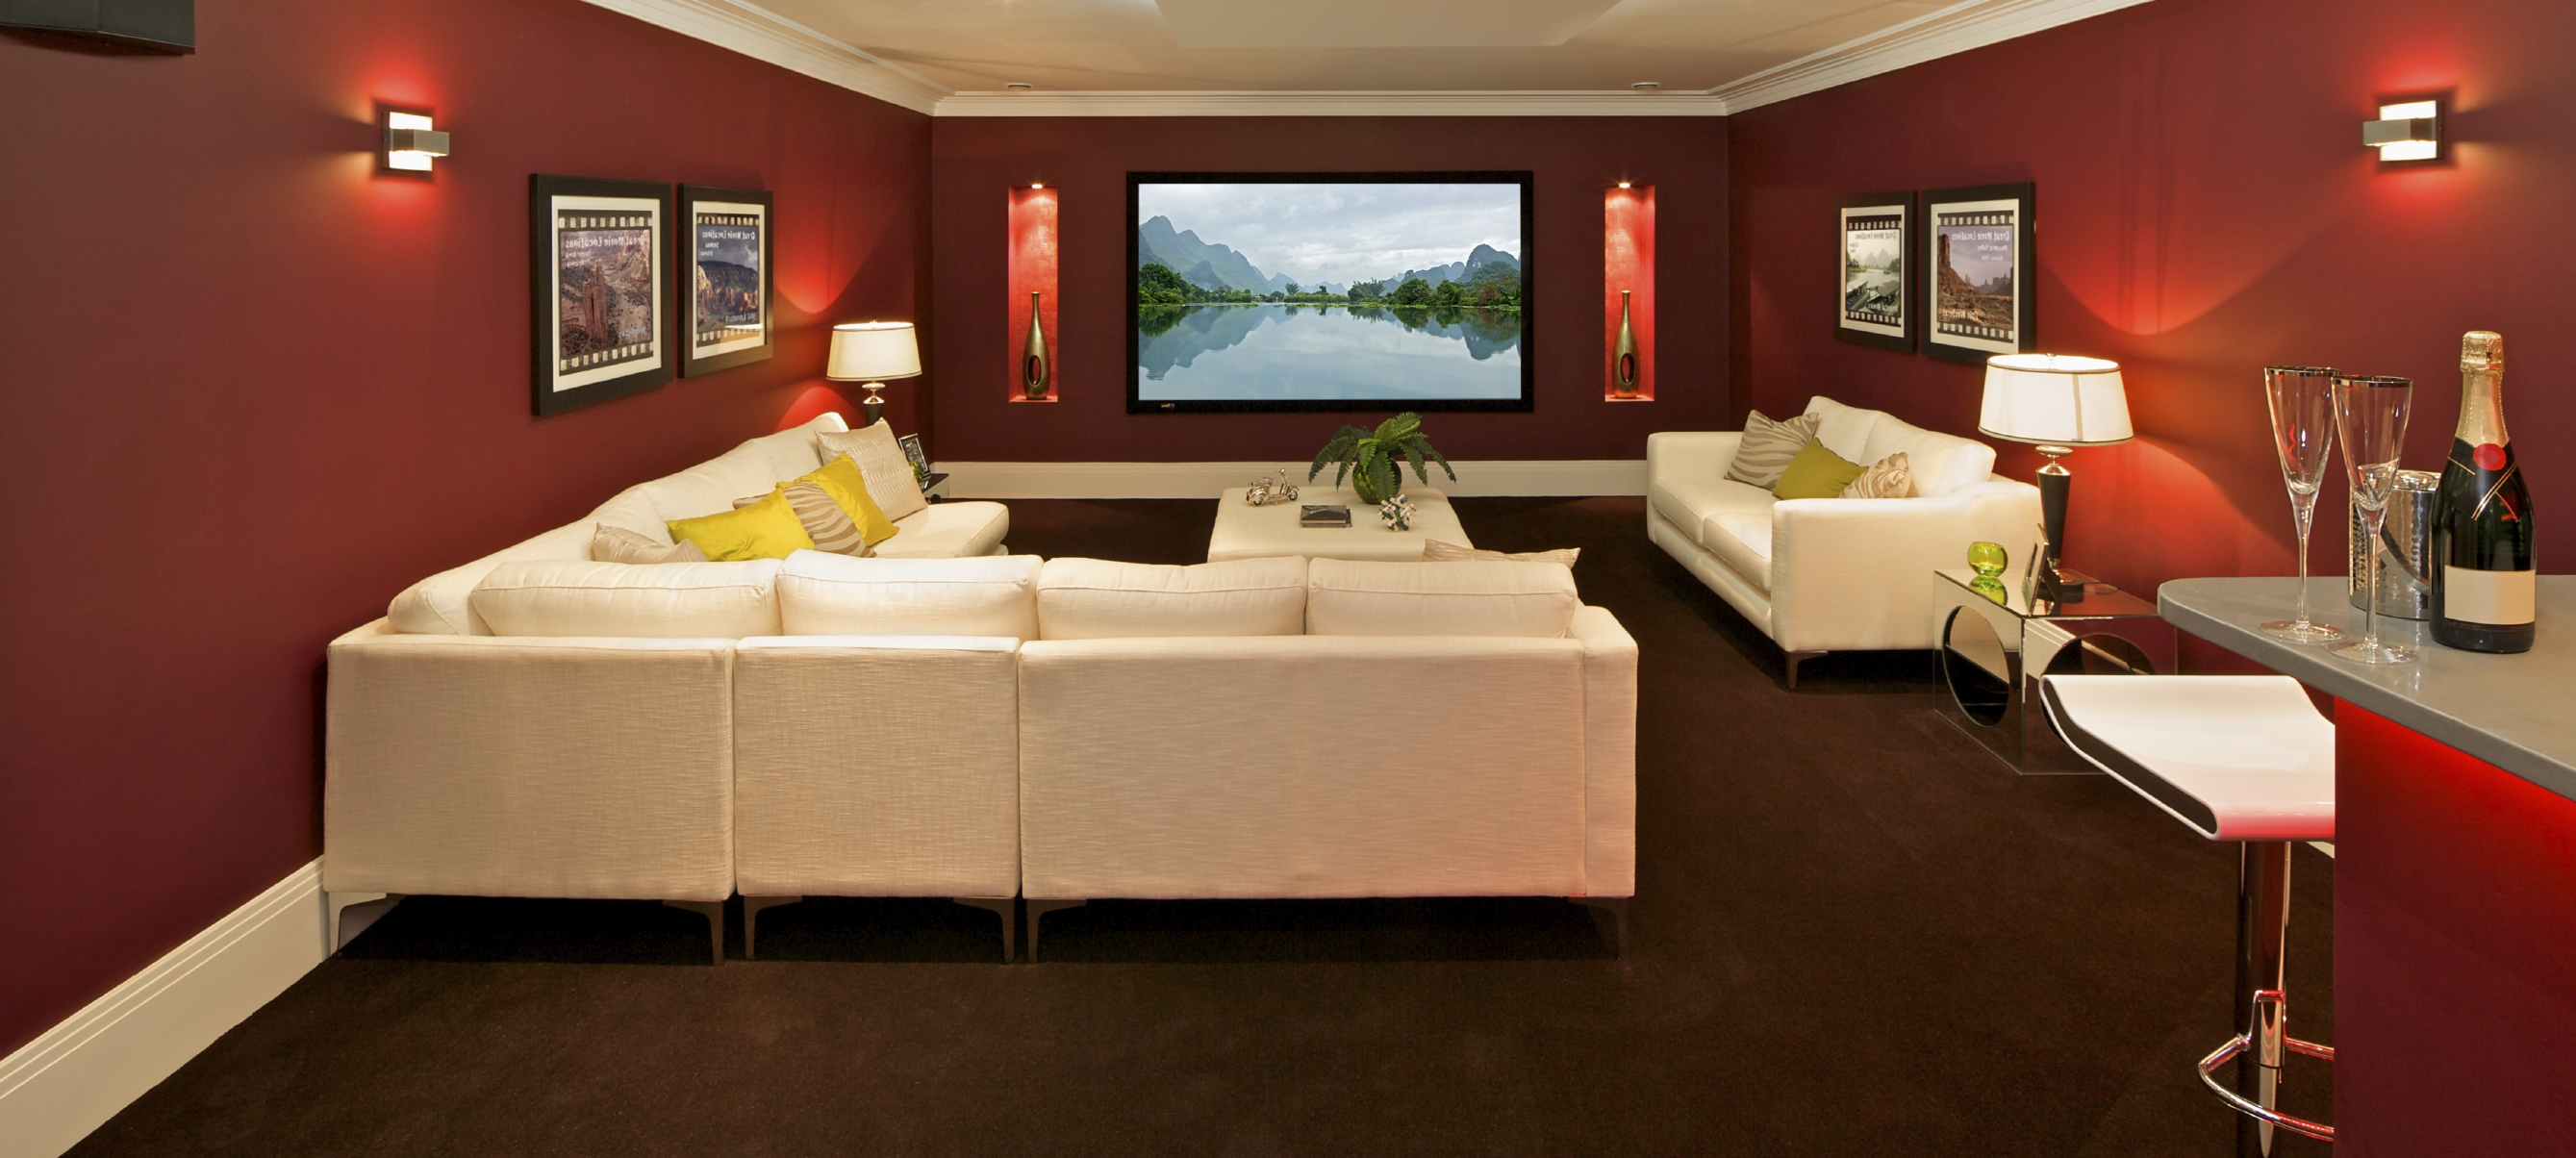 Basement Home Theater Design Ideas For Your Modern Home